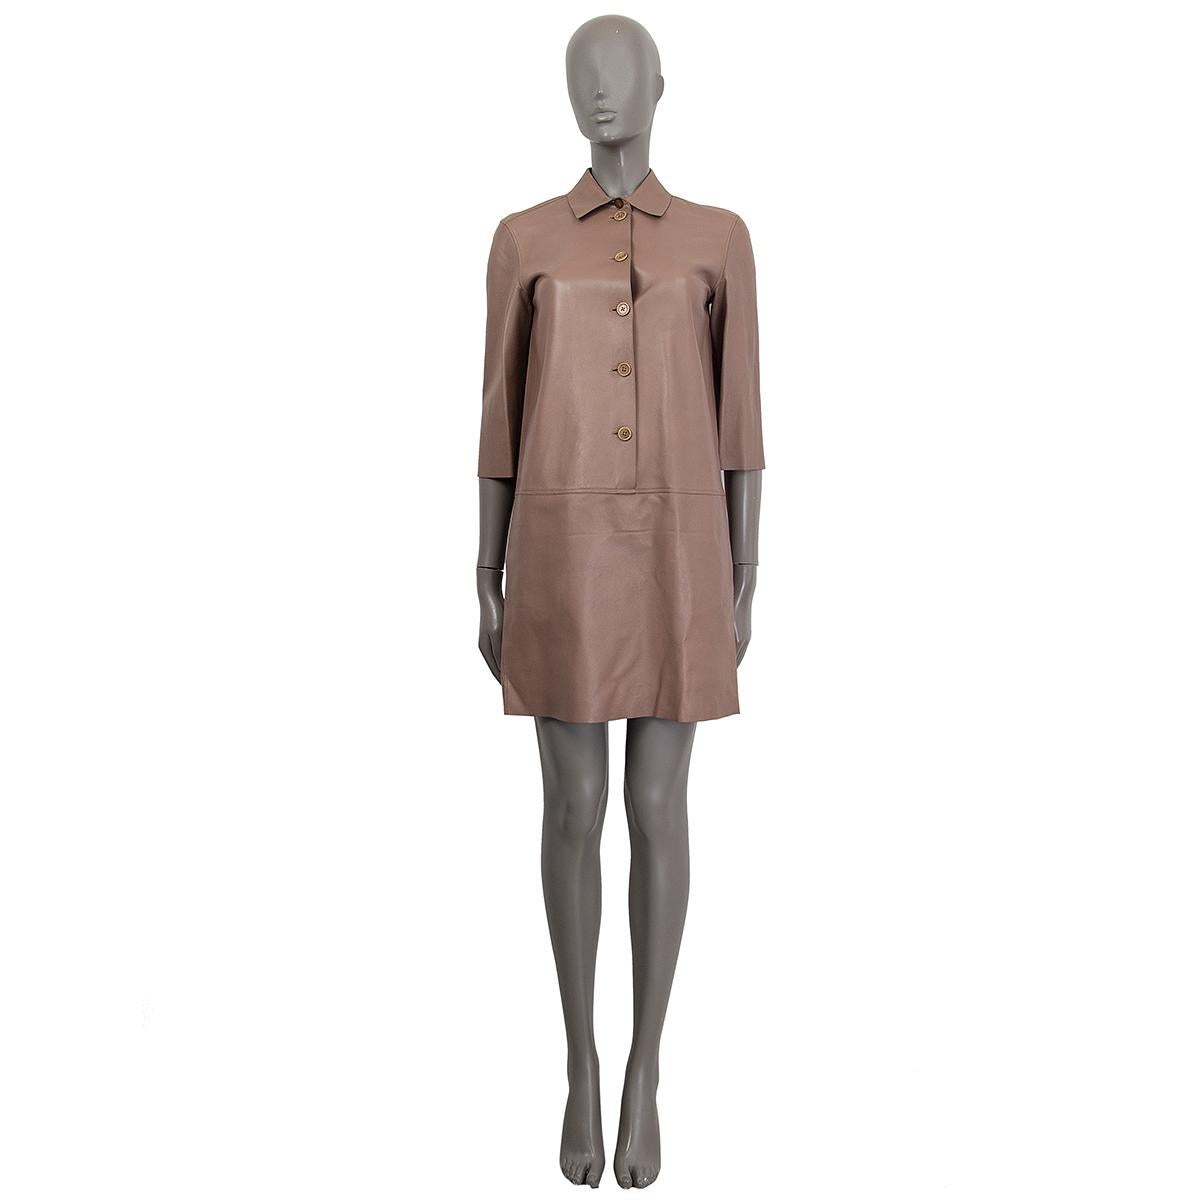 100% authentic Loro Piana shirt-dress in taupe leather with 3/4 sleeves. Opens with buttons on the front. Unlined. Has been worn and is in excellent condition.

Measurements
Tag Size	38
Size	XS
Shoulder Width	40cm (15.6in)
Bust To	90cm